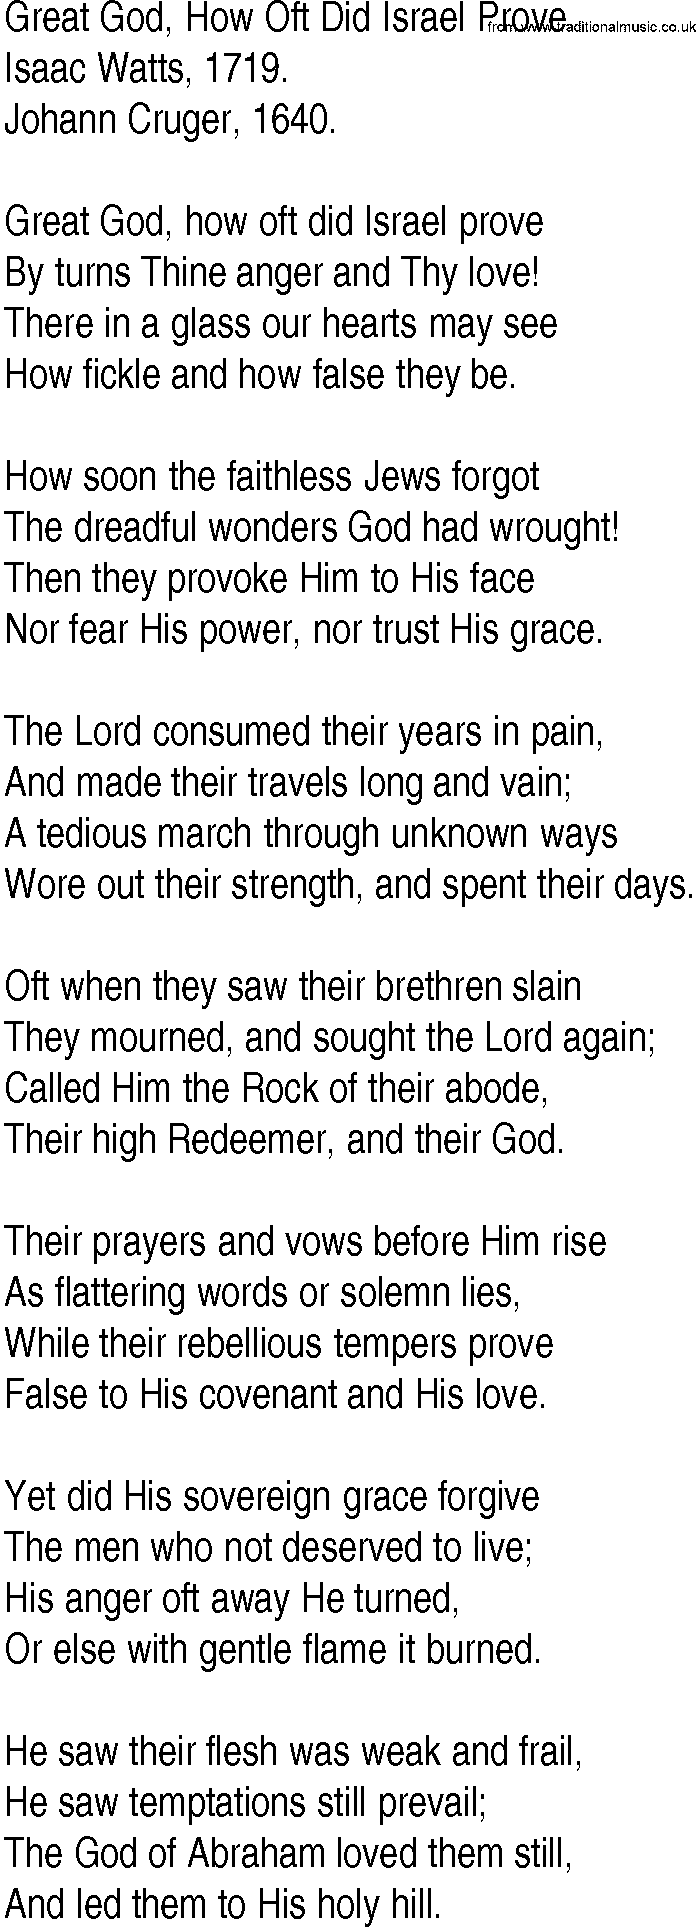 Hymn and Gospel Song: Great God, How Oft Did Israel Prove by Isaac Watts lyrics